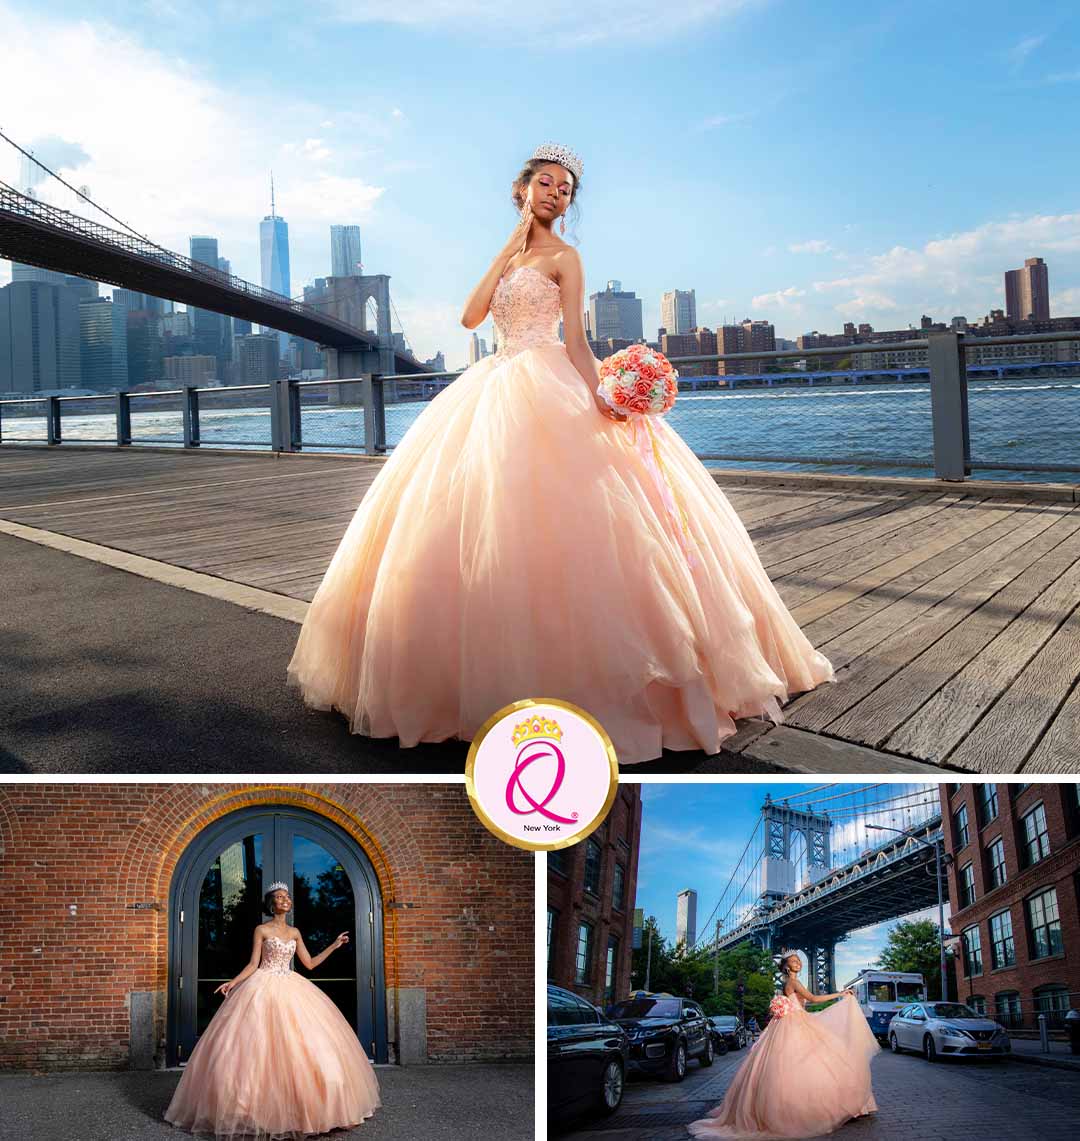 Photography & Video for Weddings & Sweet 16's in NYC